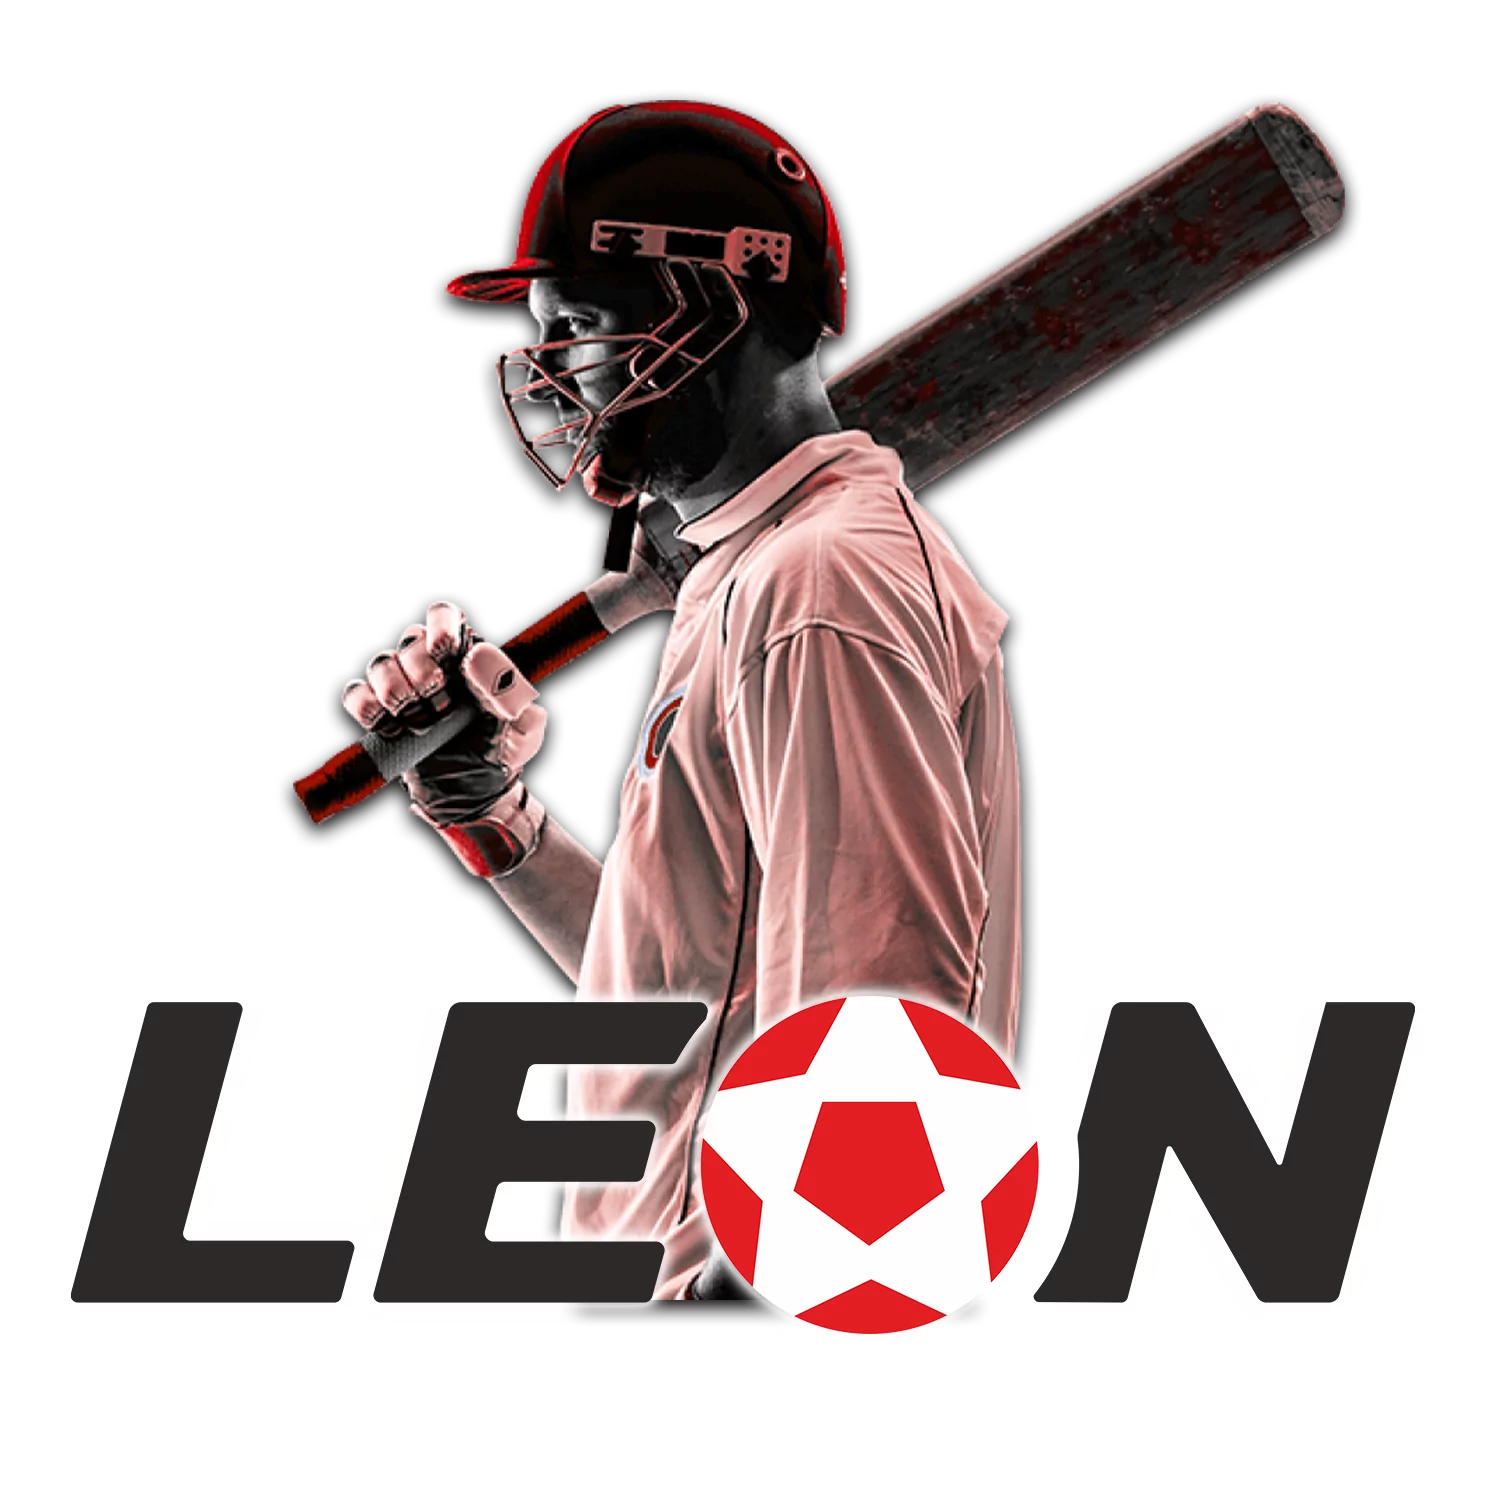 Learn how to place bets on cricket and other sports matches at Leon Bet.